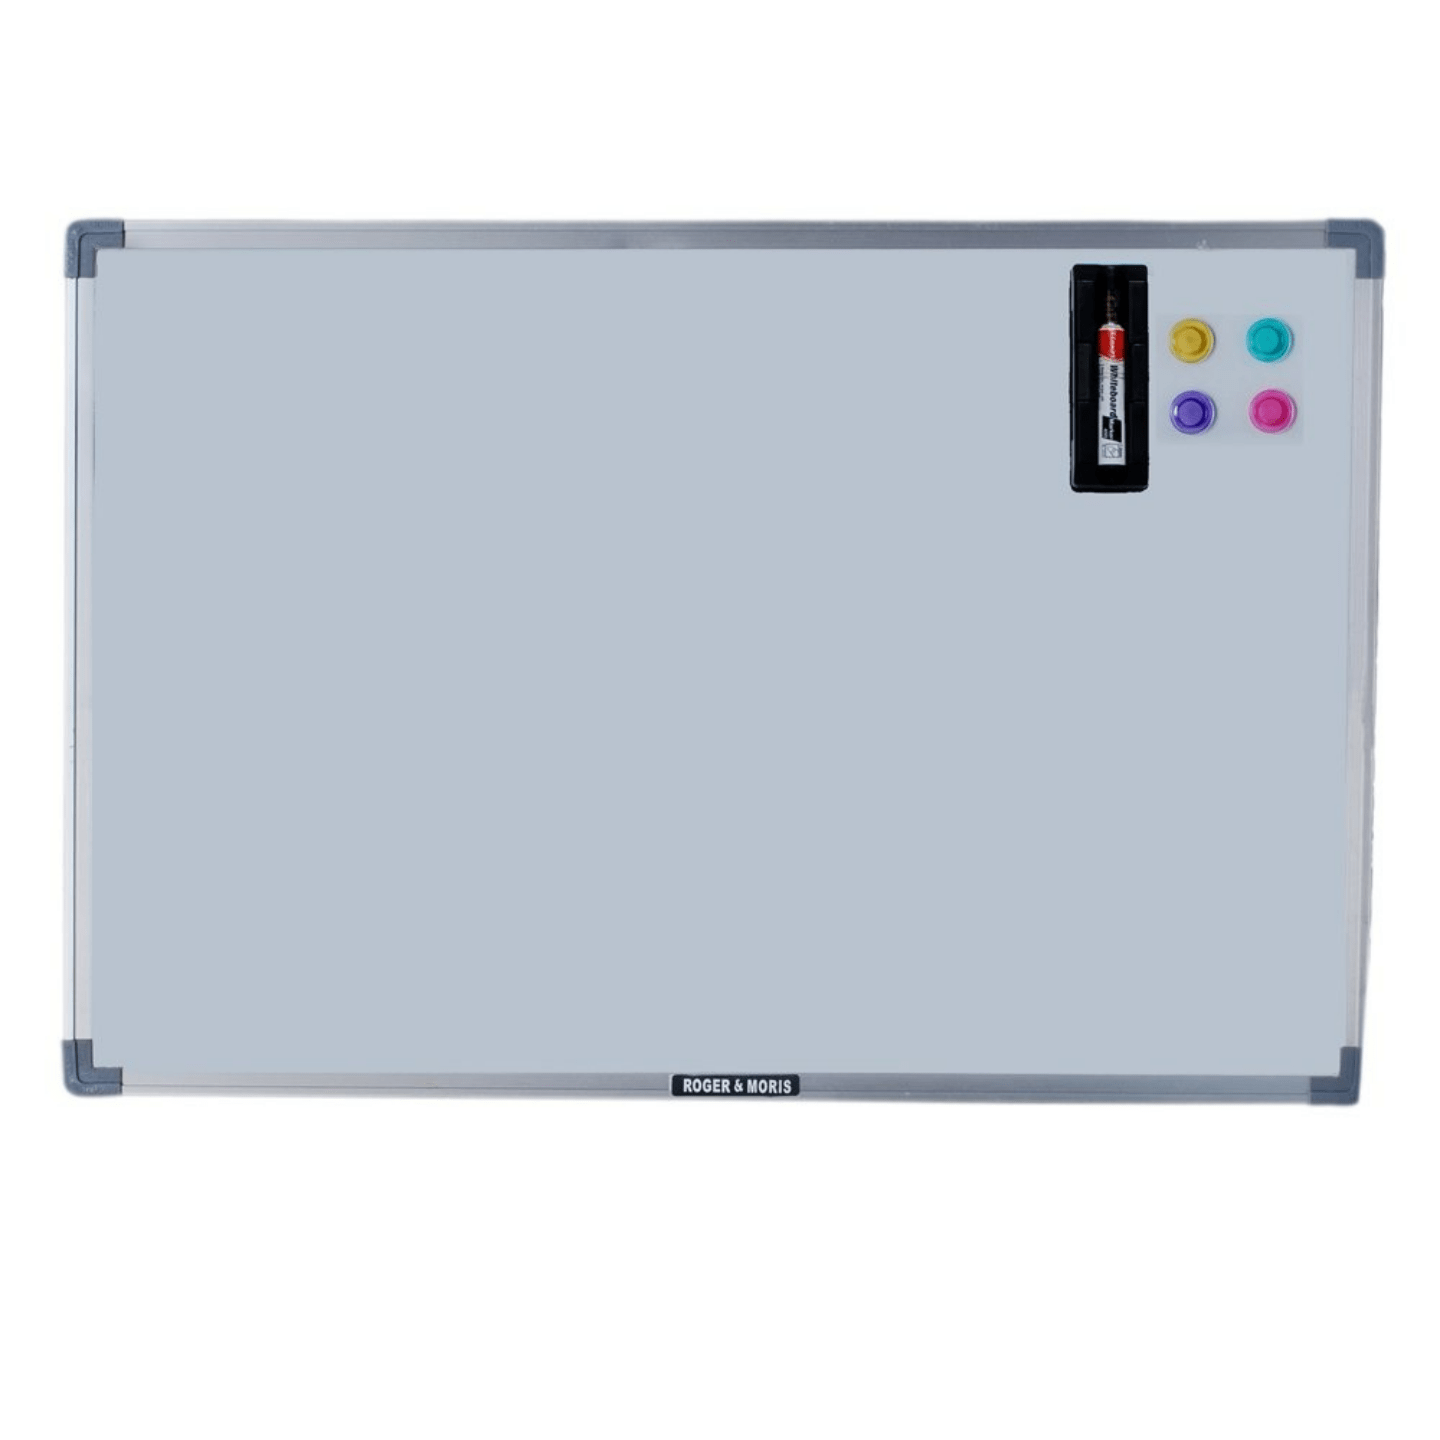 Roger & Moris Magnetic White Board with Marker and 4 Magnetic Buttons (3 feet x 2 feet)